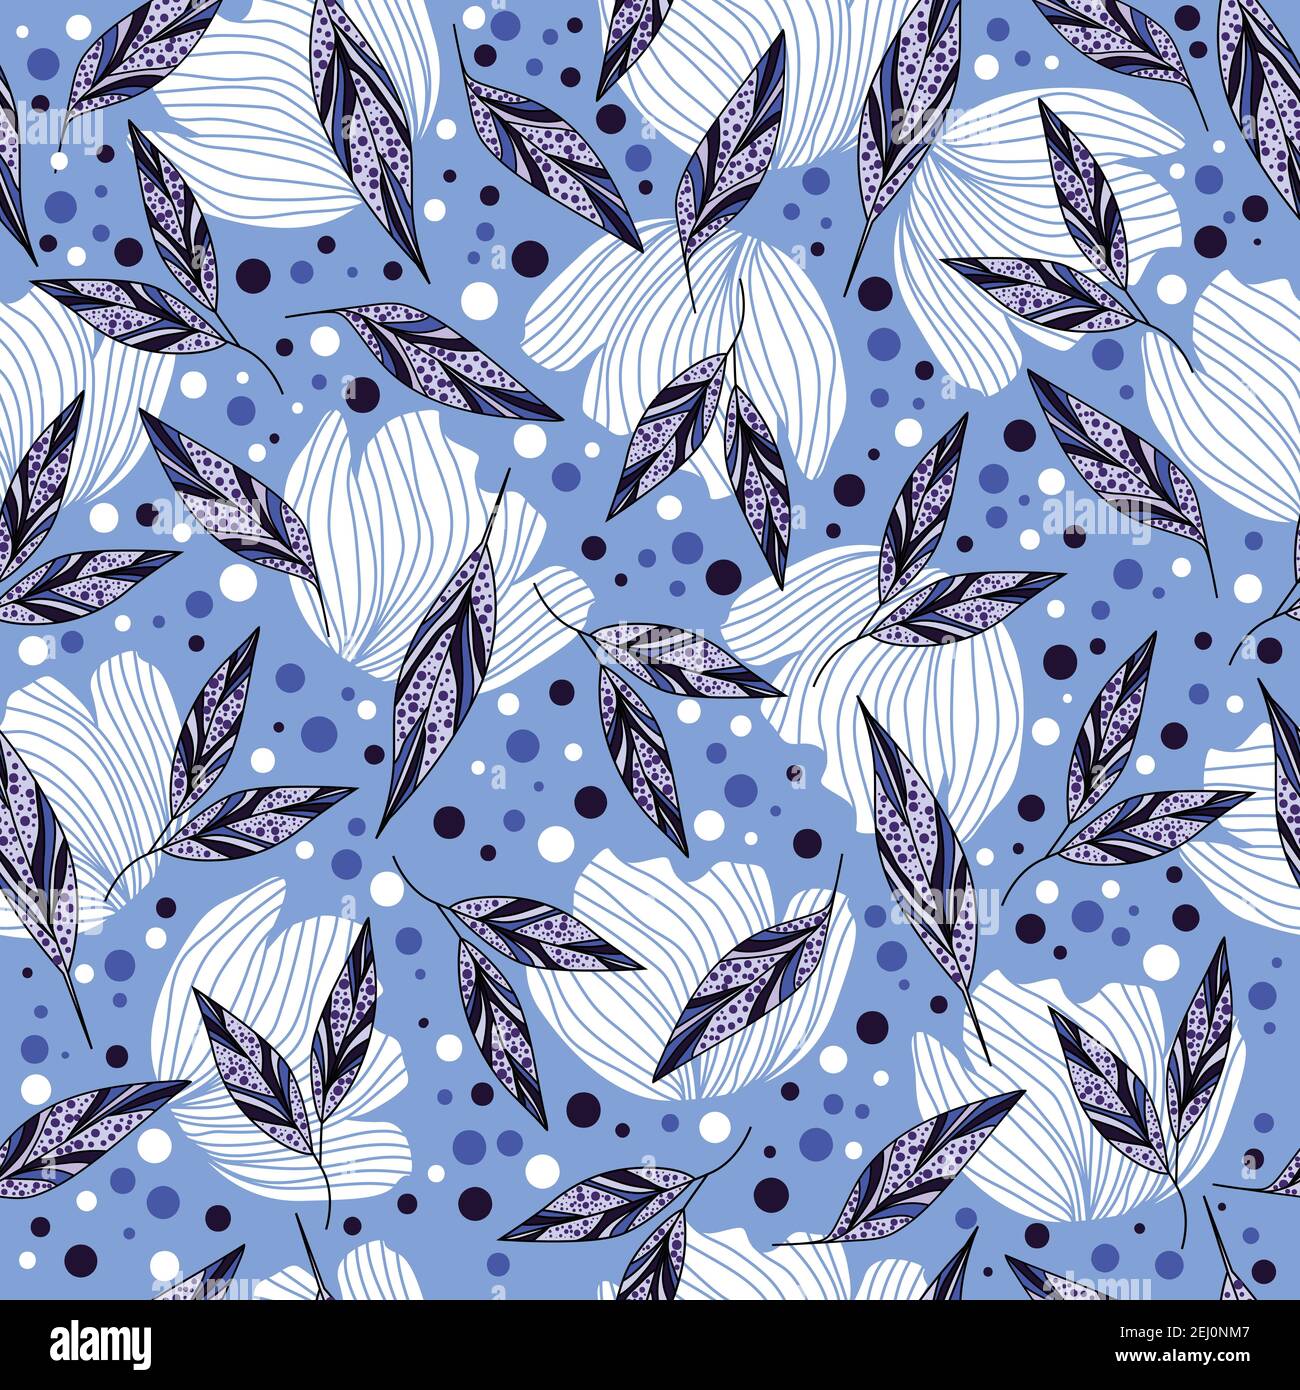 Abstract floral pattern design with flowers, leaves and dots on a blue background Stock Vector